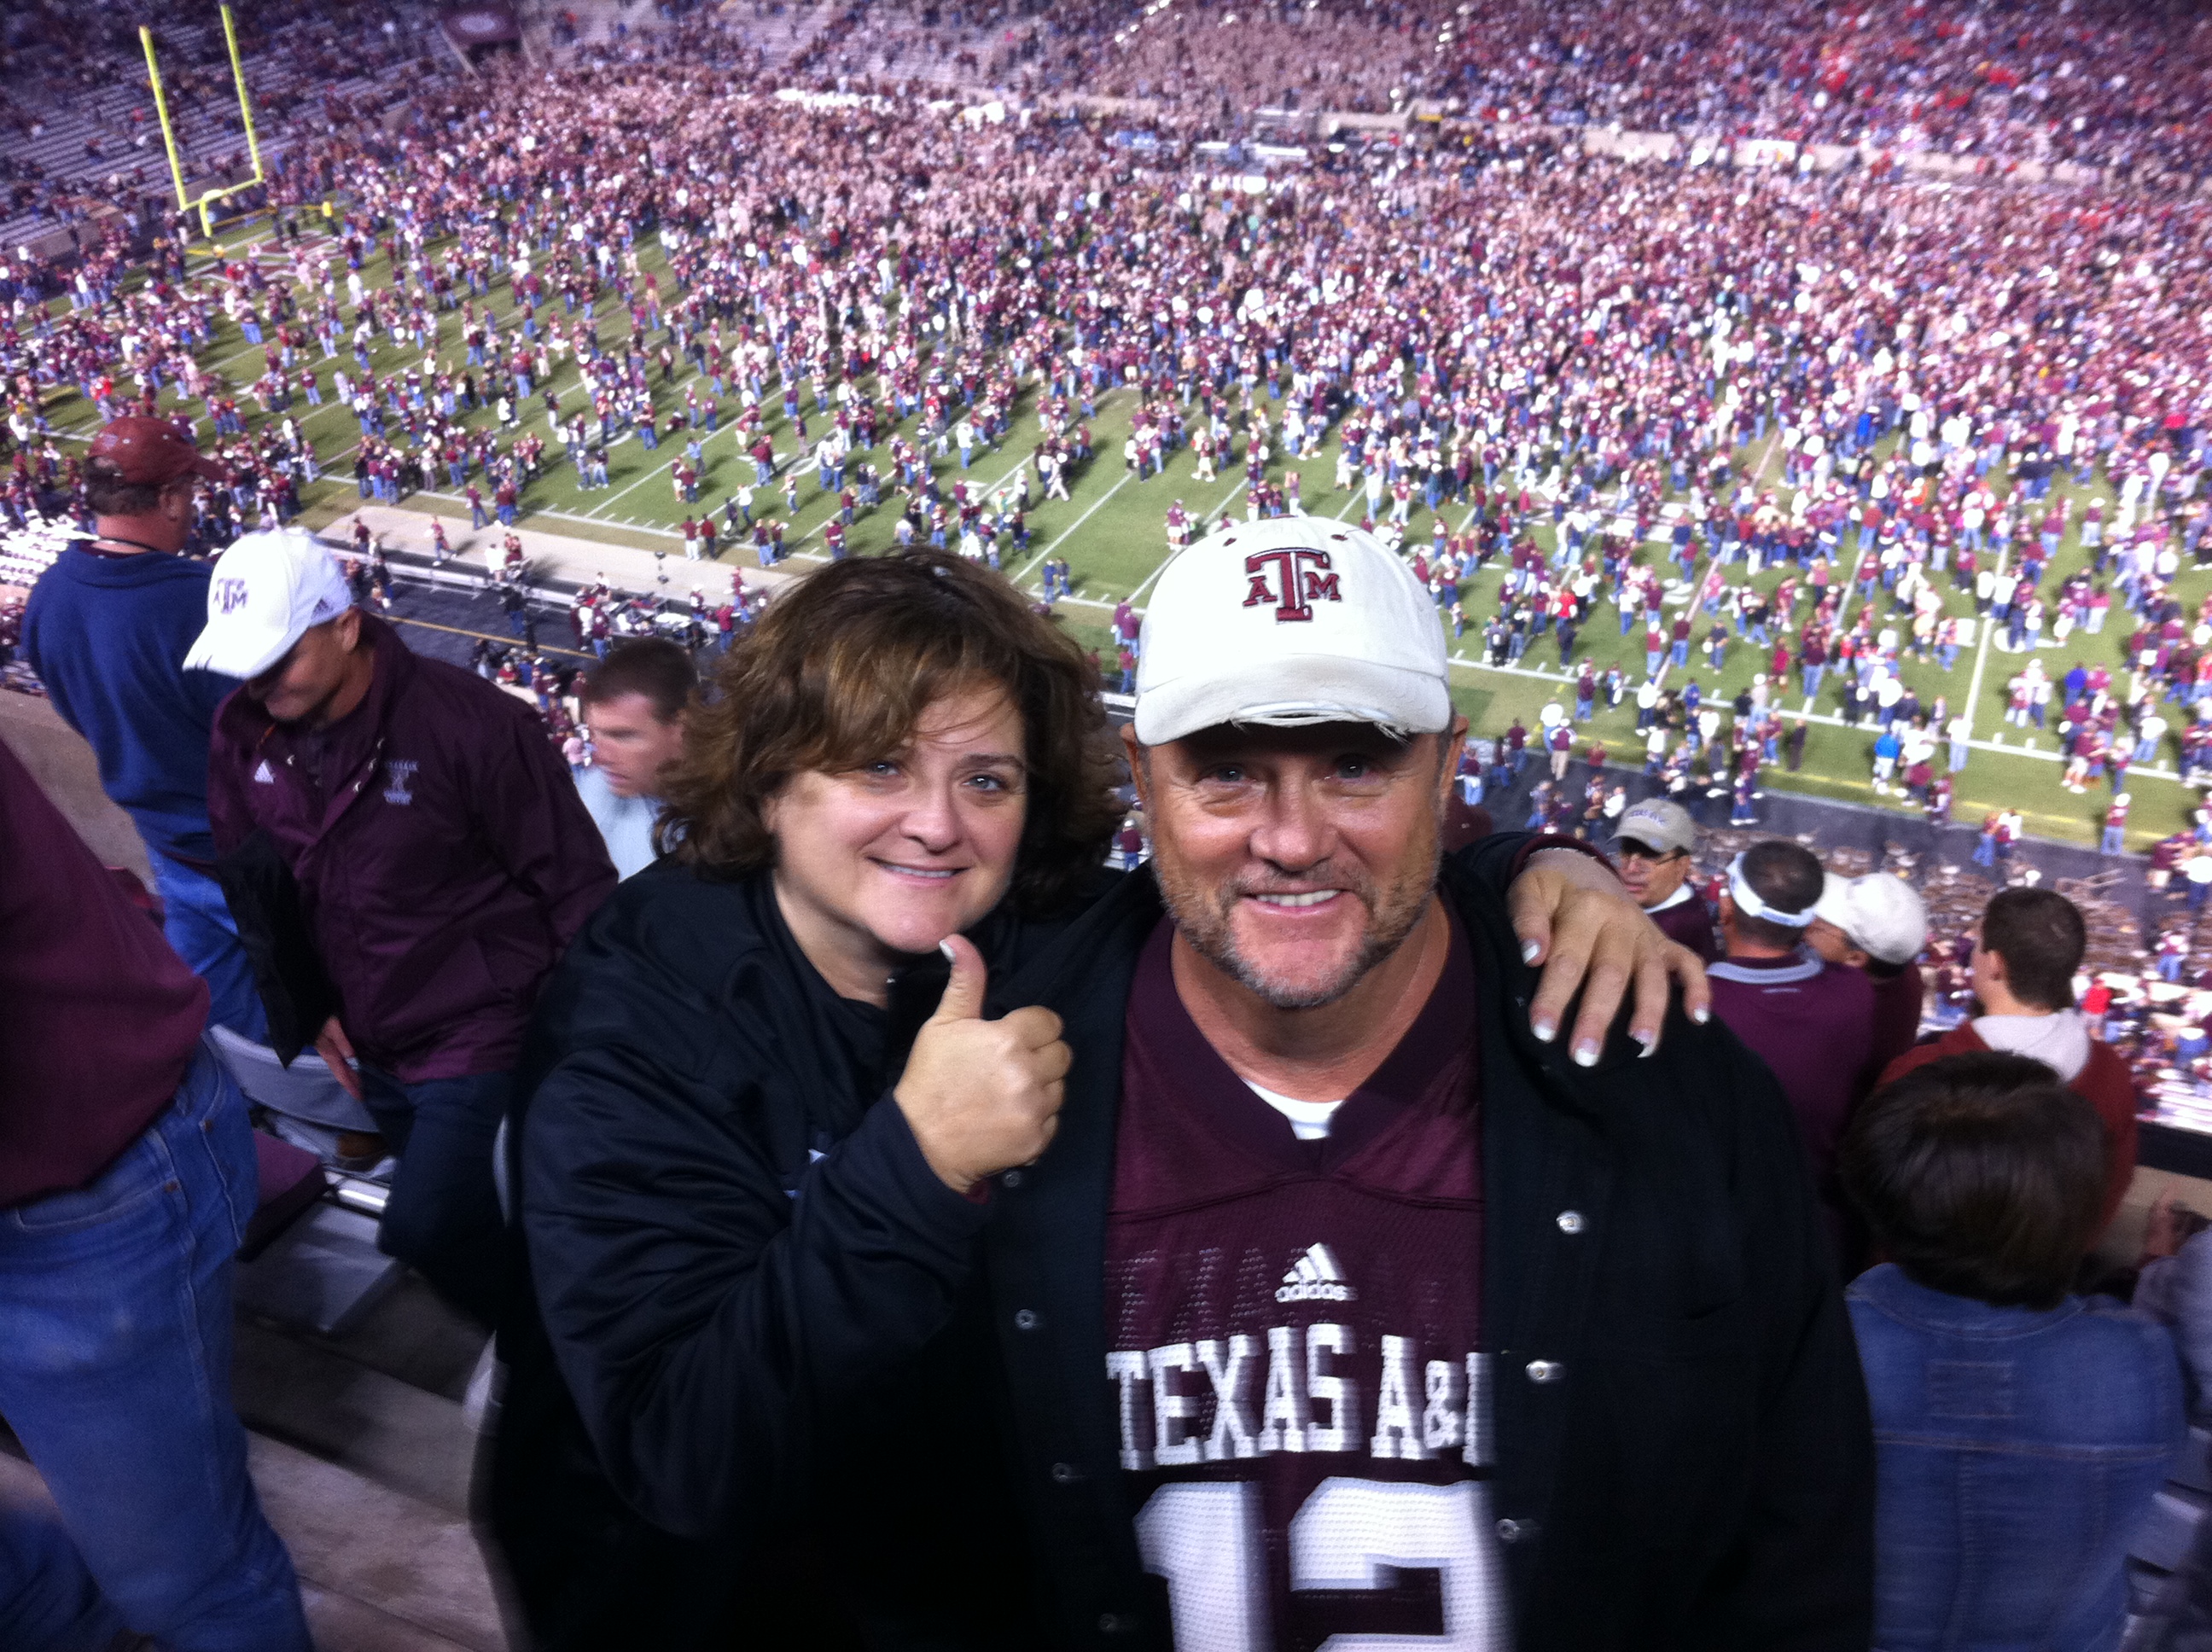 Angela and Hank Wiederhold at an Aggie football game. Photo courtesy of Angela Wiederhold.